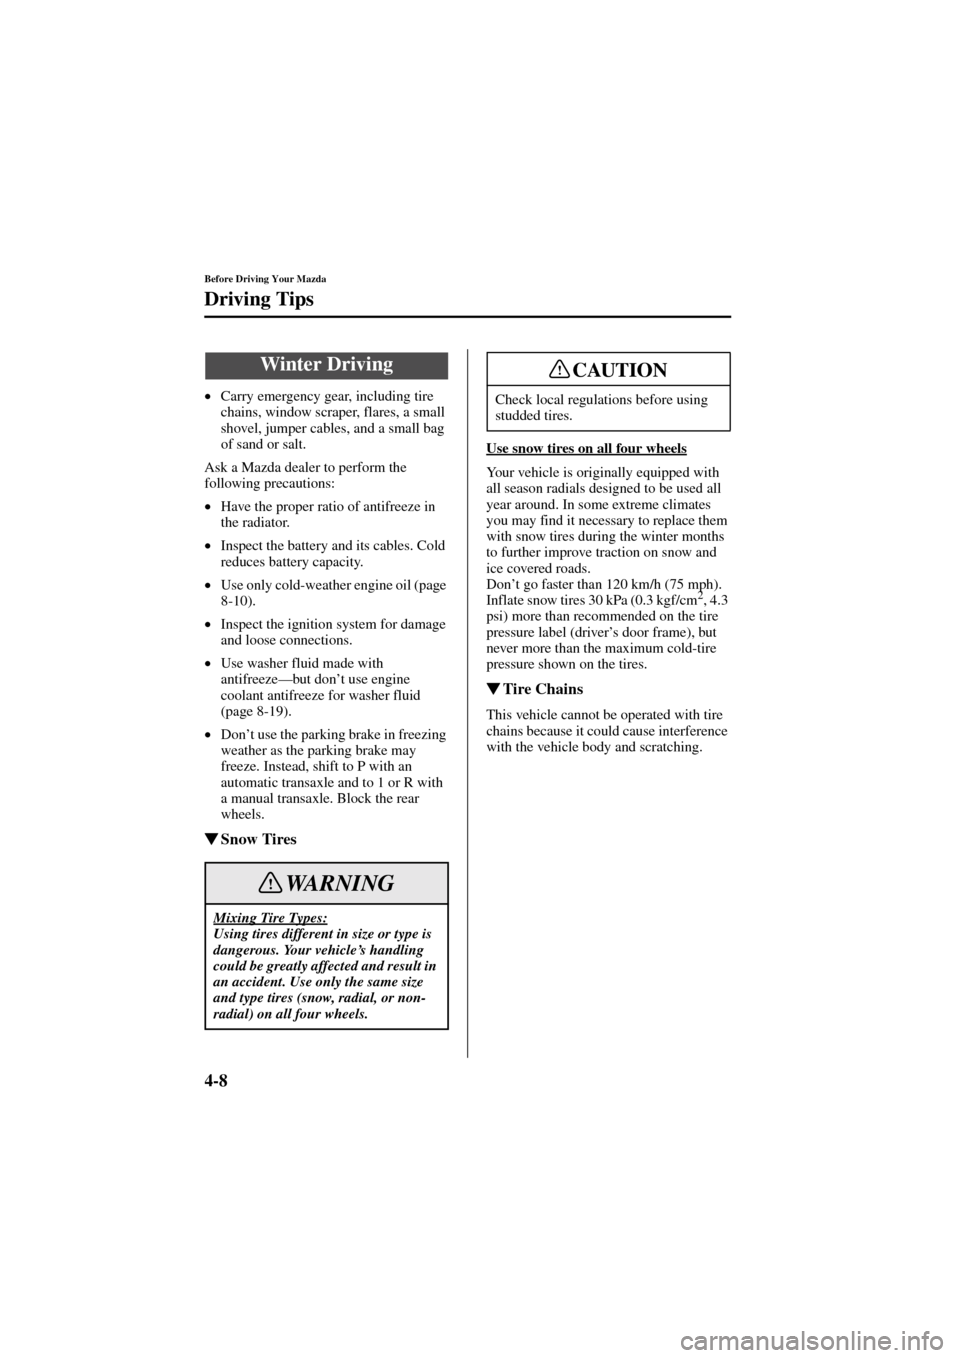 MAZDA MODEL 6 2004  Owners Manual (in English) 4-8
Before Driving Your Mazda
Driving Tips
Form No. 8R29-EA-02I
•
Carry emergency gear, including tire 
chains, window scraper, flares, a small 
shovel, jumper cables, and a small bag 
of sand or sa